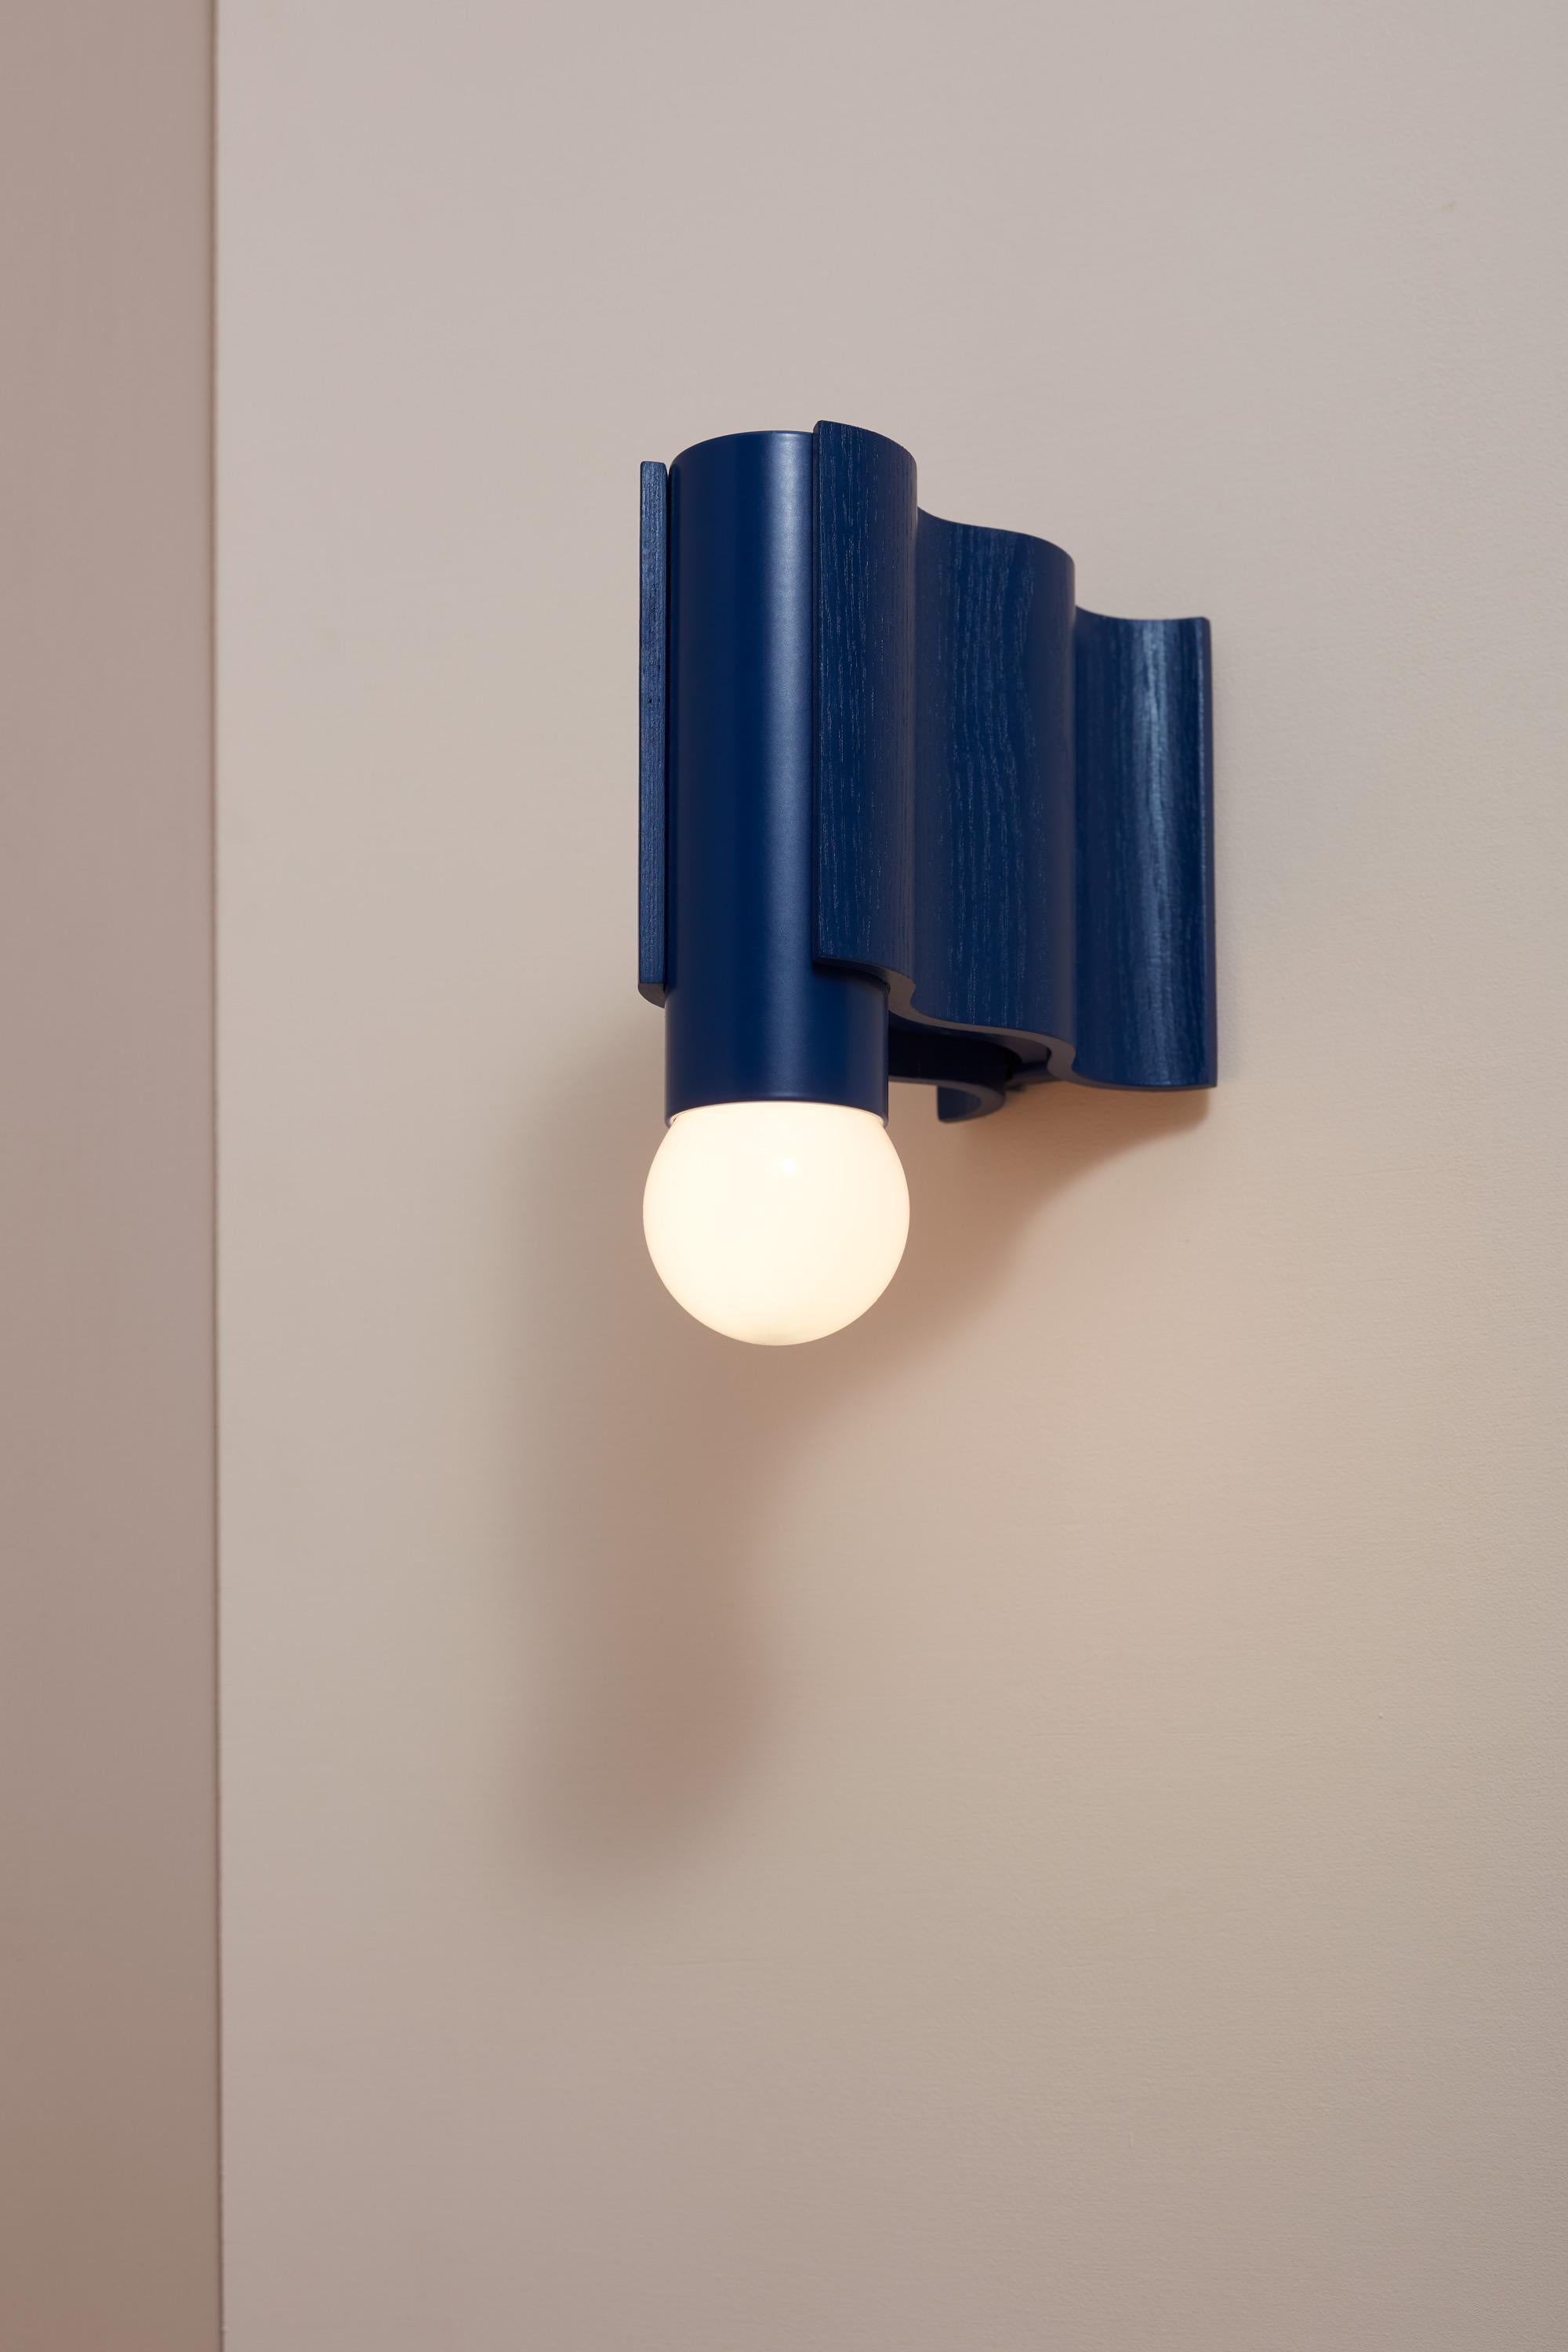 Double Corrugation Sconce / Wall Light in Natural Ash Veneer and Sapphire Blue For Sale 3